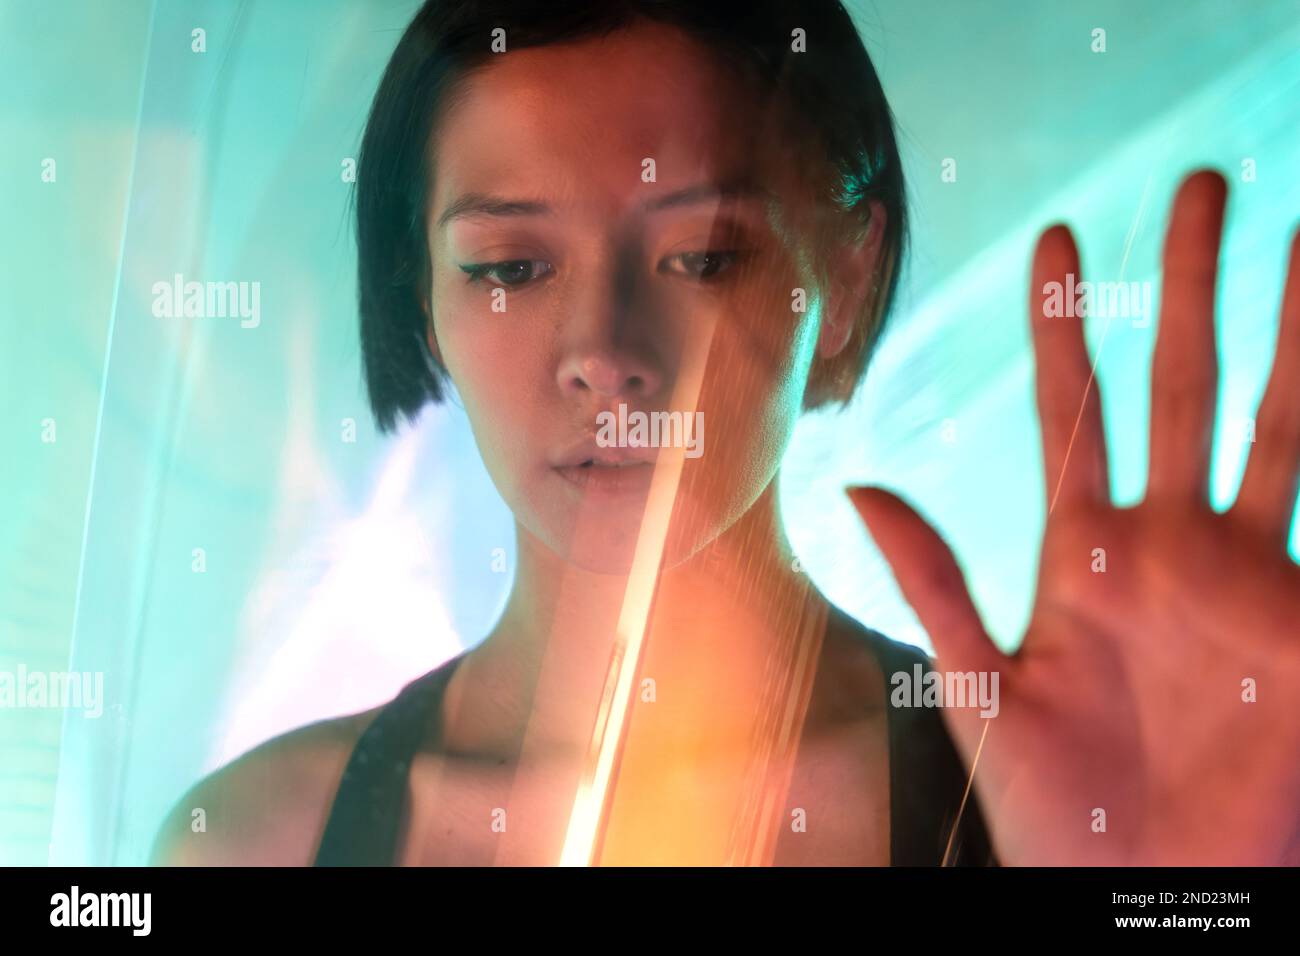 Through glass of confident young female with short hair and brown eyes looking down while showing stop gesture Stock Photo